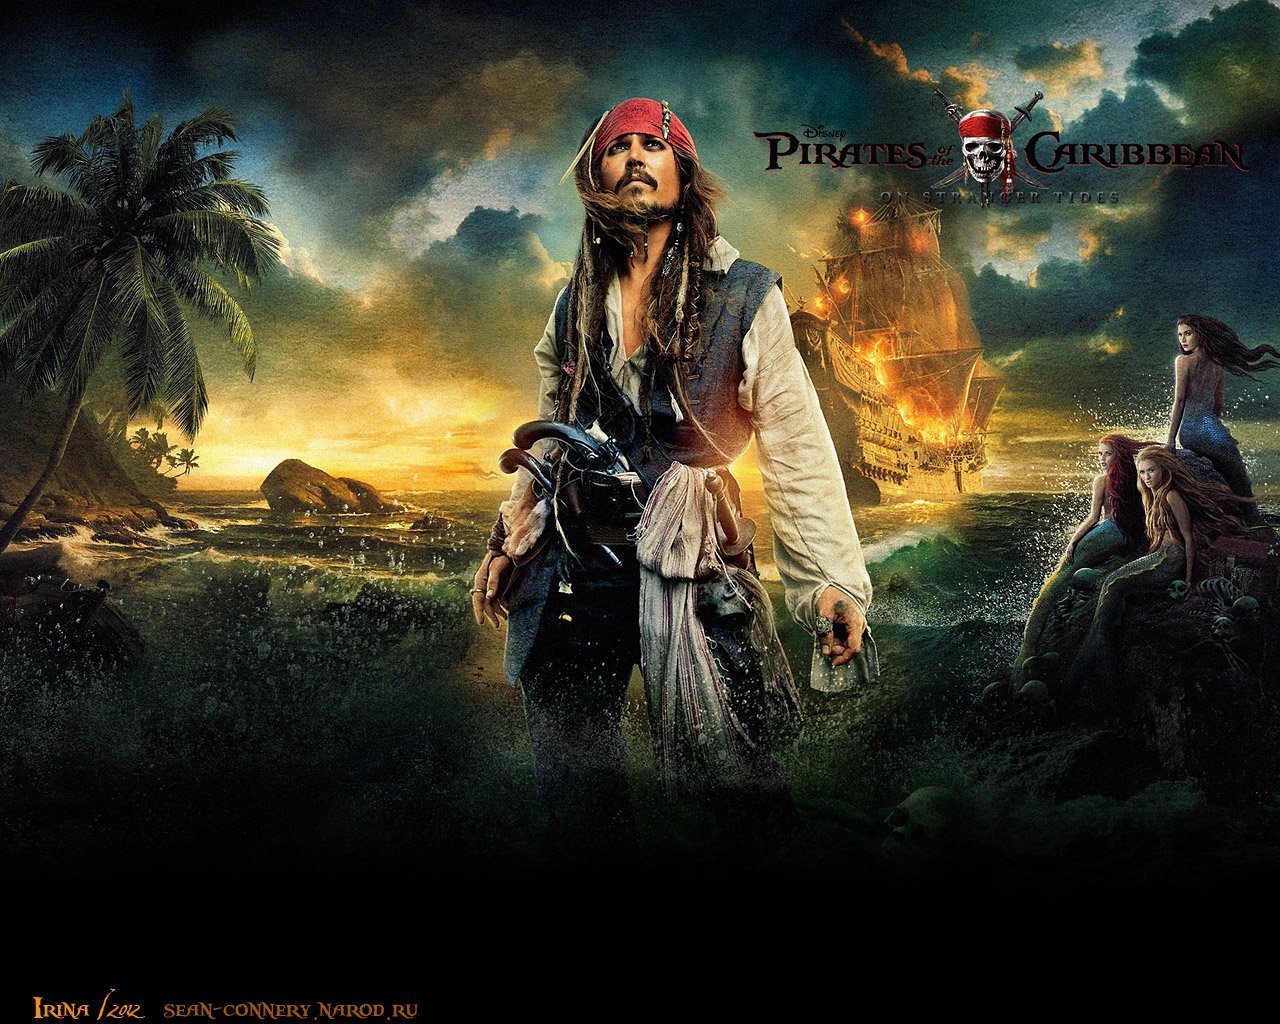 Pirates of the Caribbean images POTC wallpapers HD